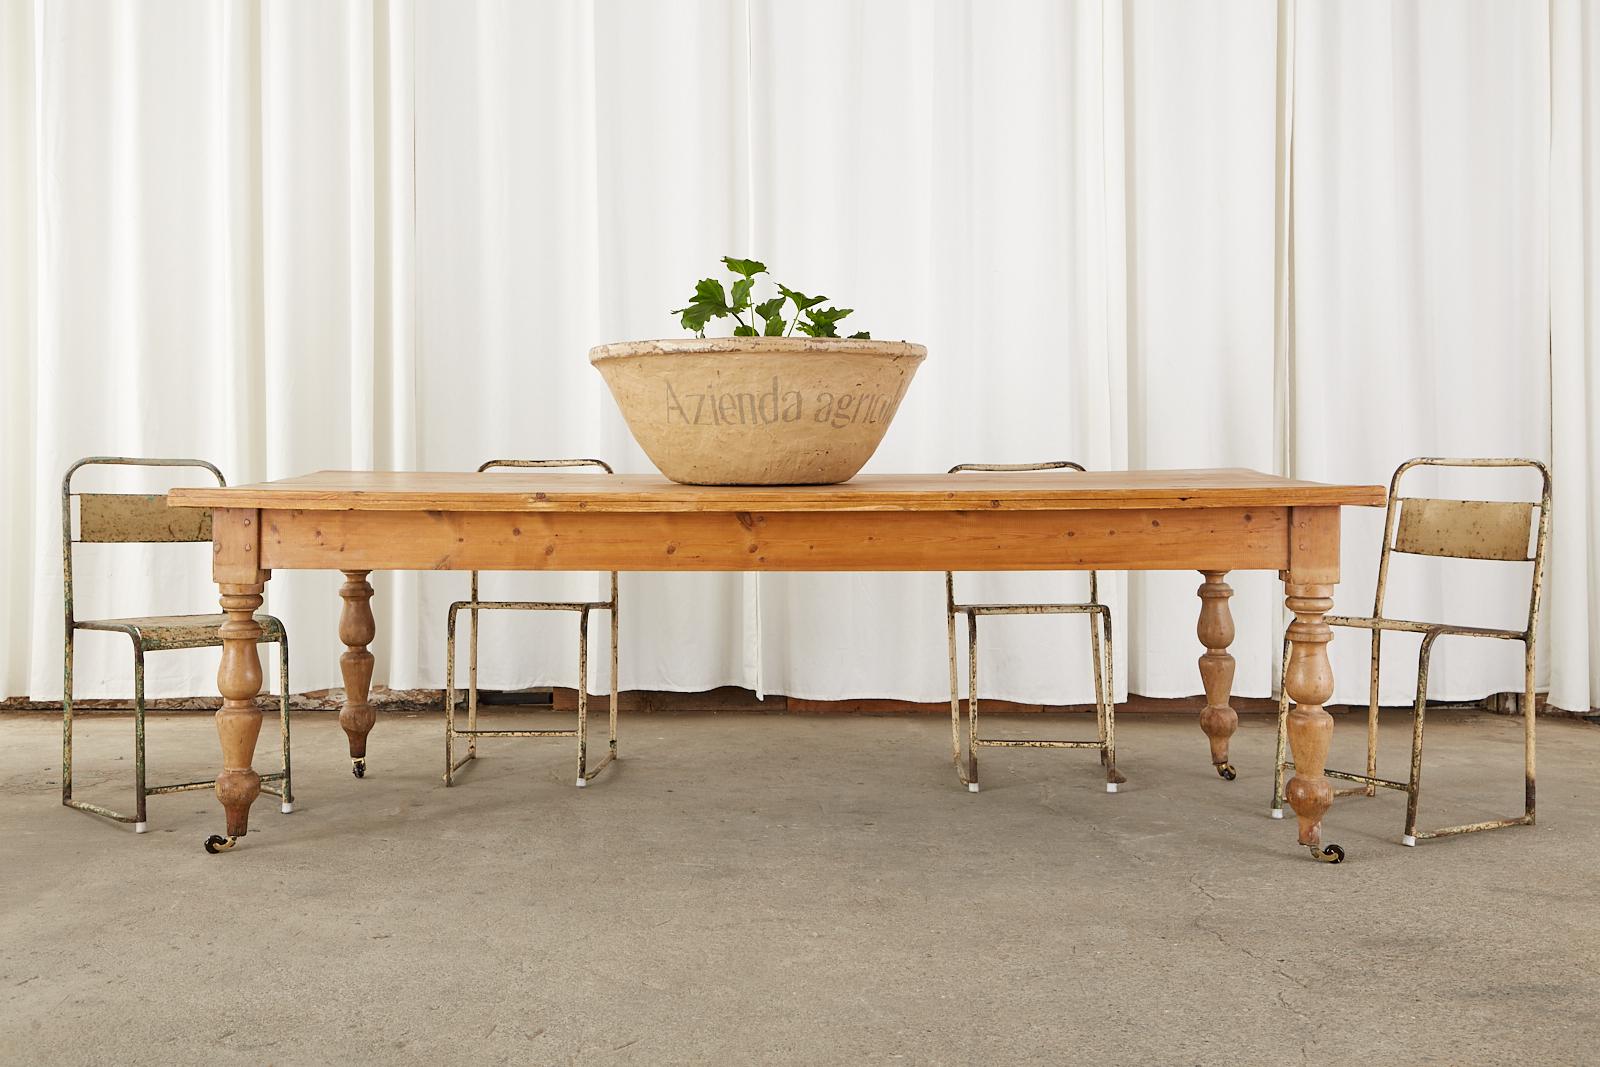 Rustic late 19th century country English farmhouse dining table or harvest table crafted from pine. This grand table features an 8 foot long rectangular plank top with a thick 1.5 inch border on the edges. The top is supported by large, chunky